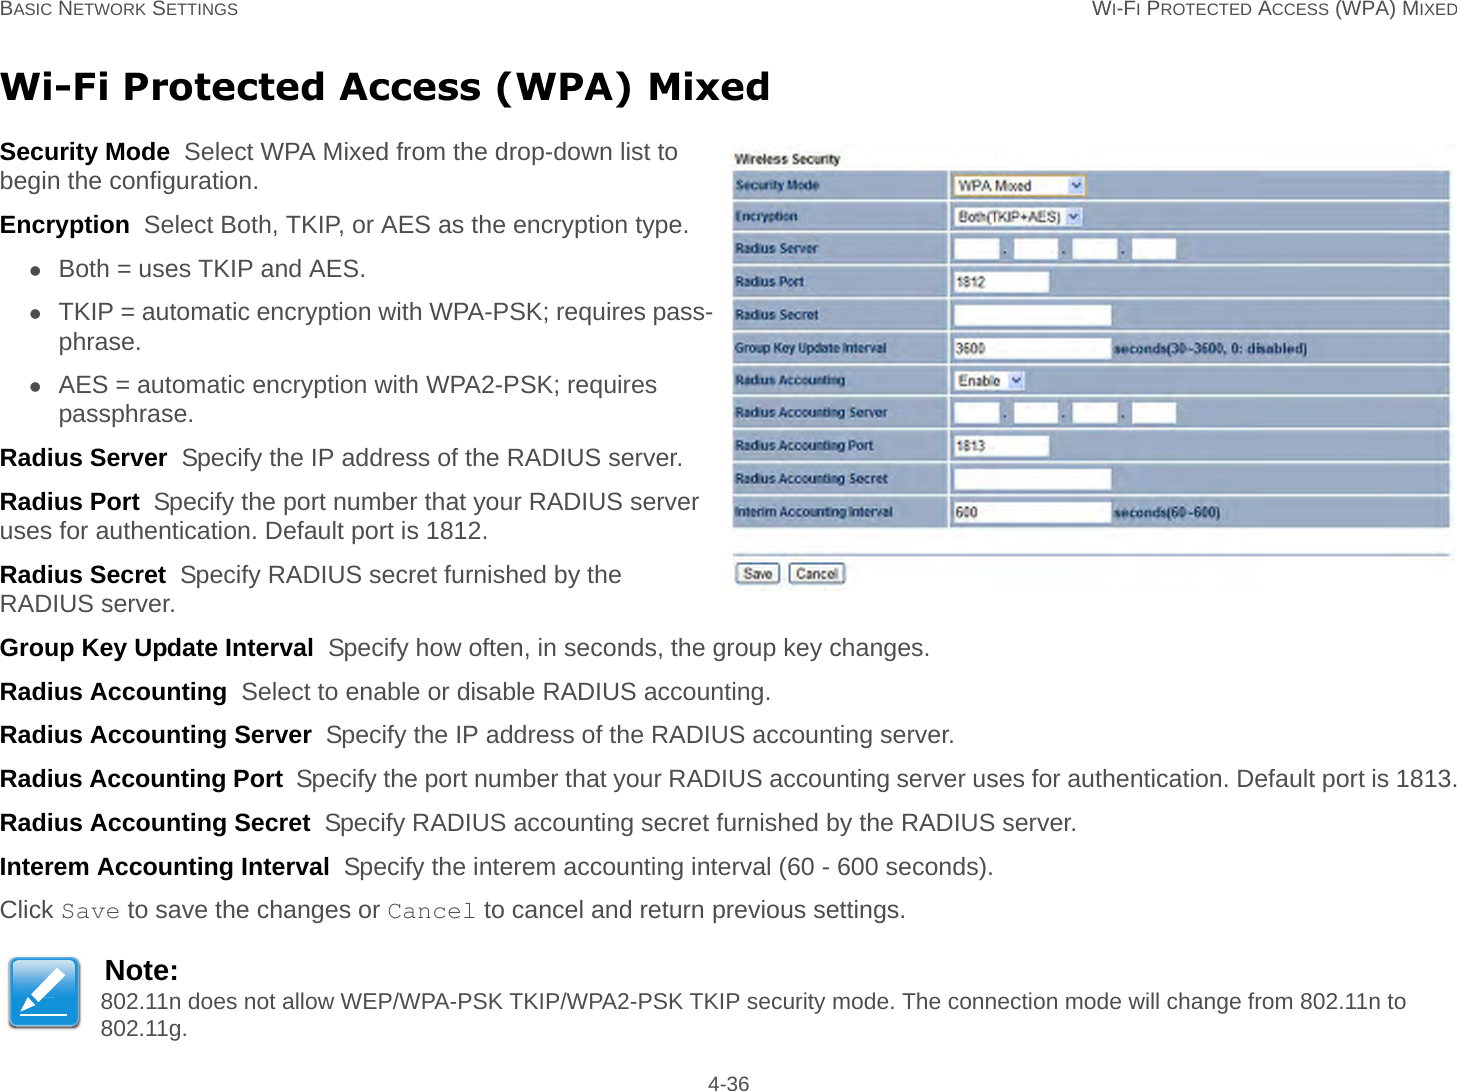 BASIC NETWORK SETTINGS WI-FI PROTECTED ACCESS (WPA) MIXED 4-36Wi-Fi Protected Access (WPA) MixedSecurity Mode  Select WPA Mixed from the drop-down list to begin the configuration.Encryption  Select Both, TKIP, or AES as the encryption type.Both = uses TKIP and AES.TKIP = automatic encryption with WPA-PSK; requires pass-phrase.AES = automatic encryption with WPA2-PSK; requires passphrase.Radius Server  Specify the IP address of the RADIUS server.Radius Port  Specify the port number that your RADIUS server uses for authentication. Default port is 1812.Radius Secret  Specify RADIUS secret furnished by the RADIUS server.Group Key Update Interval  Specify how often, in seconds, the group key changes.Radius Accounting  Select to enable or disable RADIUS accounting.Radius Accounting Server  Specify the IP address of the RADIUS accounting server.Radius Accounting Port  Specify the port number that your RADIUS accounting server uses for authentication. Default port is 1813.Radius Accounting Secret  Specify RADIUS accounting secret furnished by the RADIUS server.Interem Accounting Interval  Specify the interem accounting interval (60 - 600 seconds).Click Save to save the changes or Cancel to cancel and return previous settings.Note:802.11n does not allow WEP/WPA-PSK TKIP/WPA2-PSK TKIP security mode. The connection mode will change from 802.11n to 802.11g.